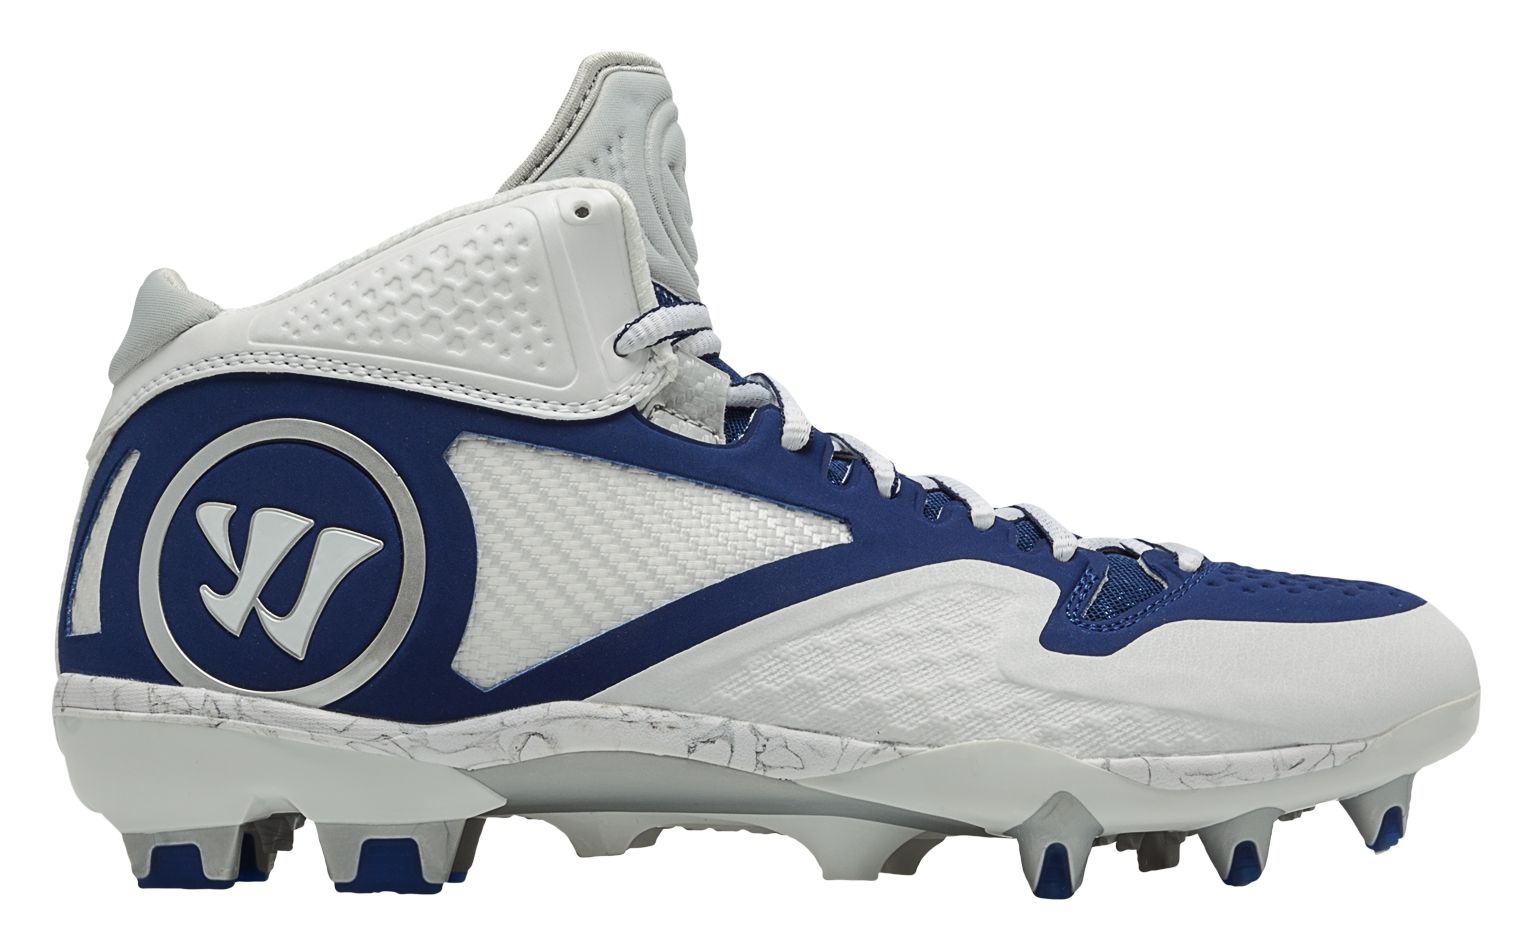 Adonis 2.0 Cleat, White with Blue image number 0